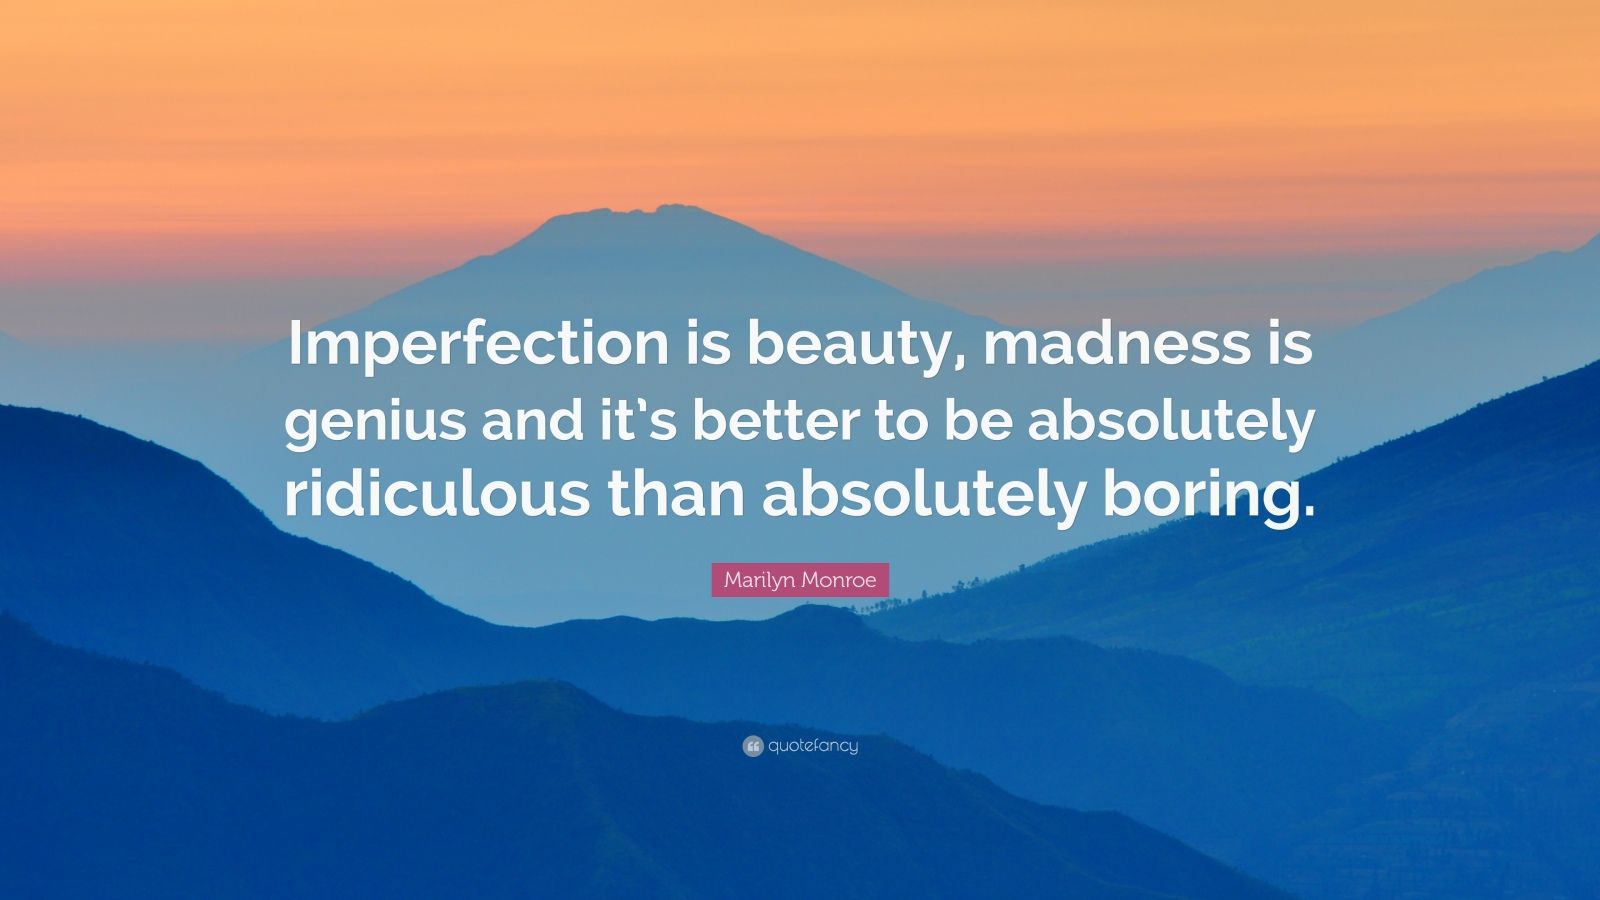 Marilyn Monroe Quote: “Imperfection is beauty, madness is genius and it ...